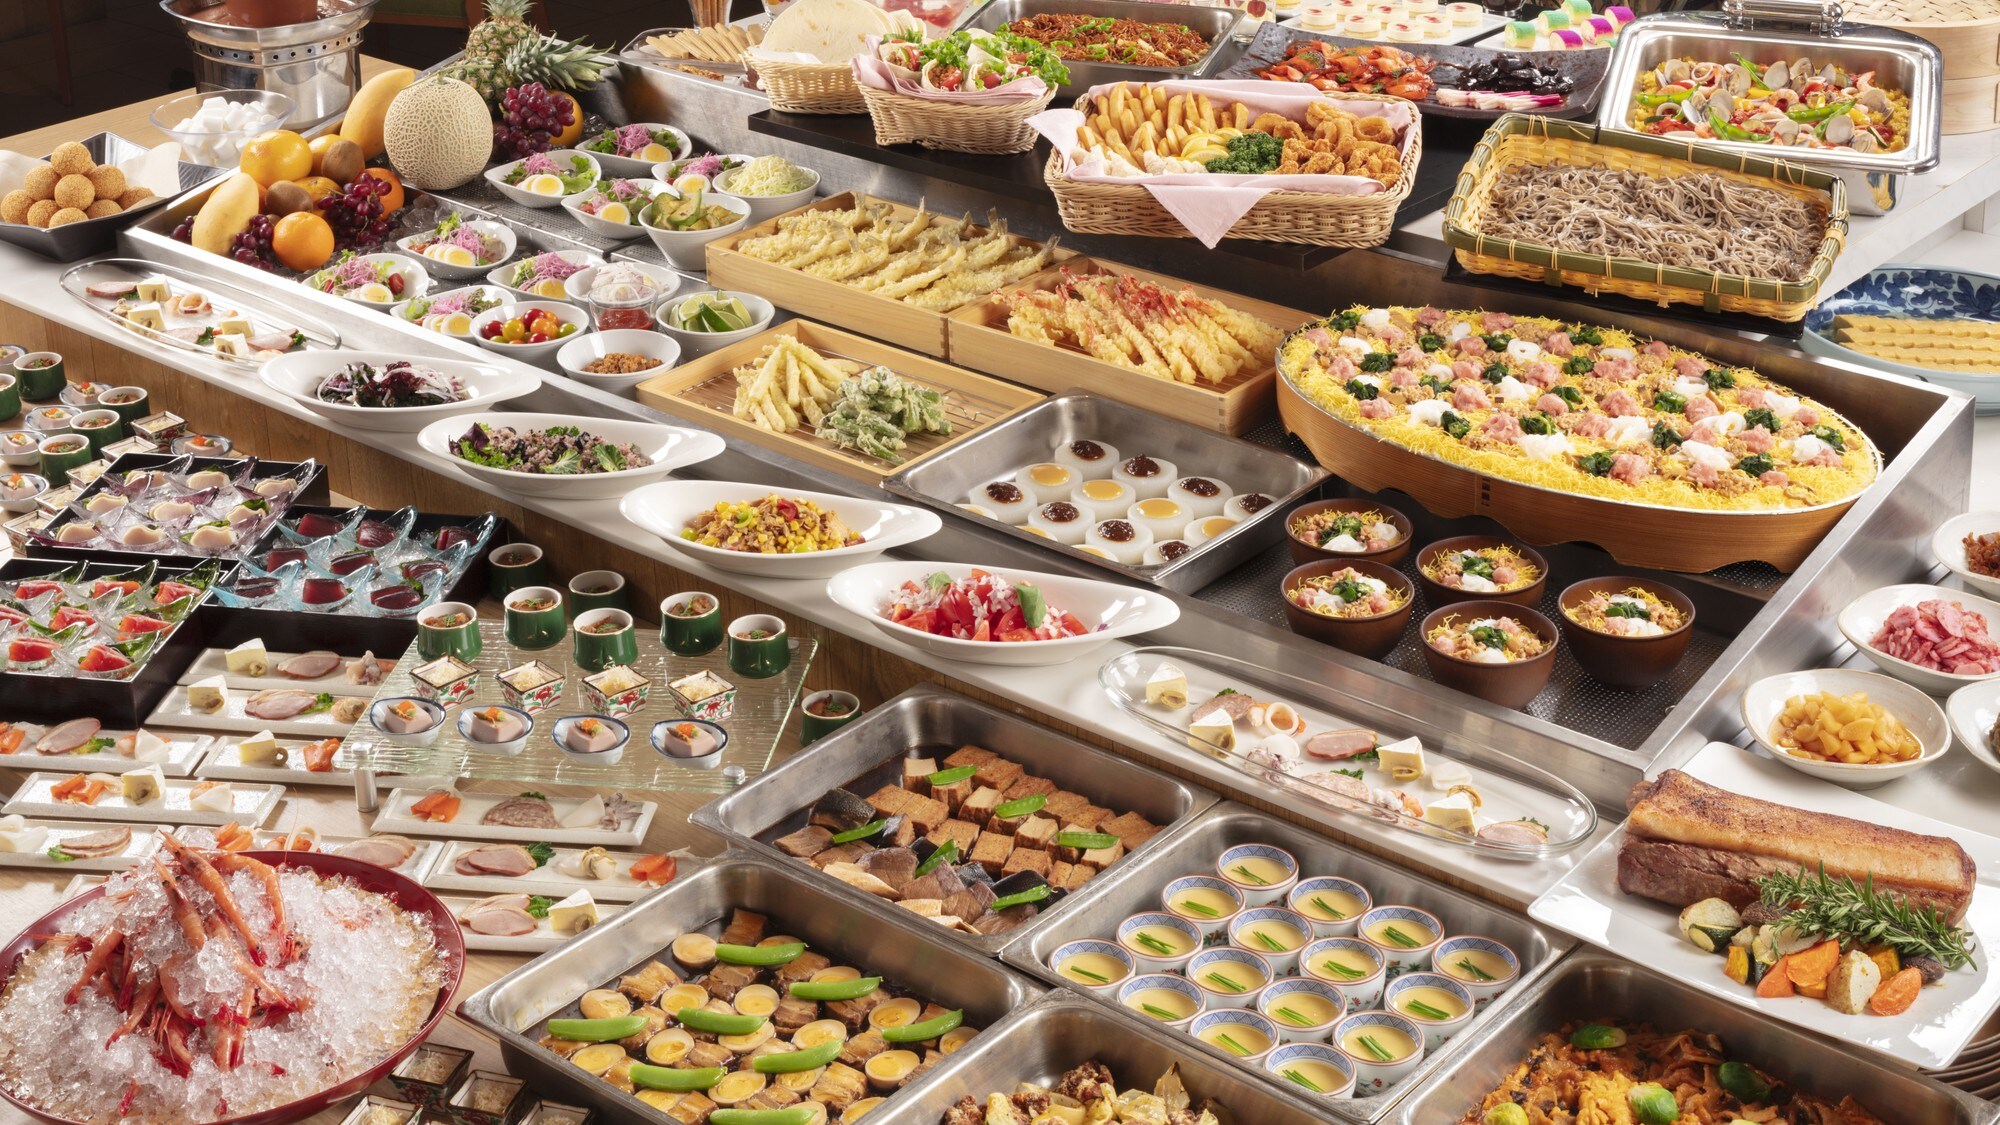 [Buffet] About 60 types of buffet that will satisfy you